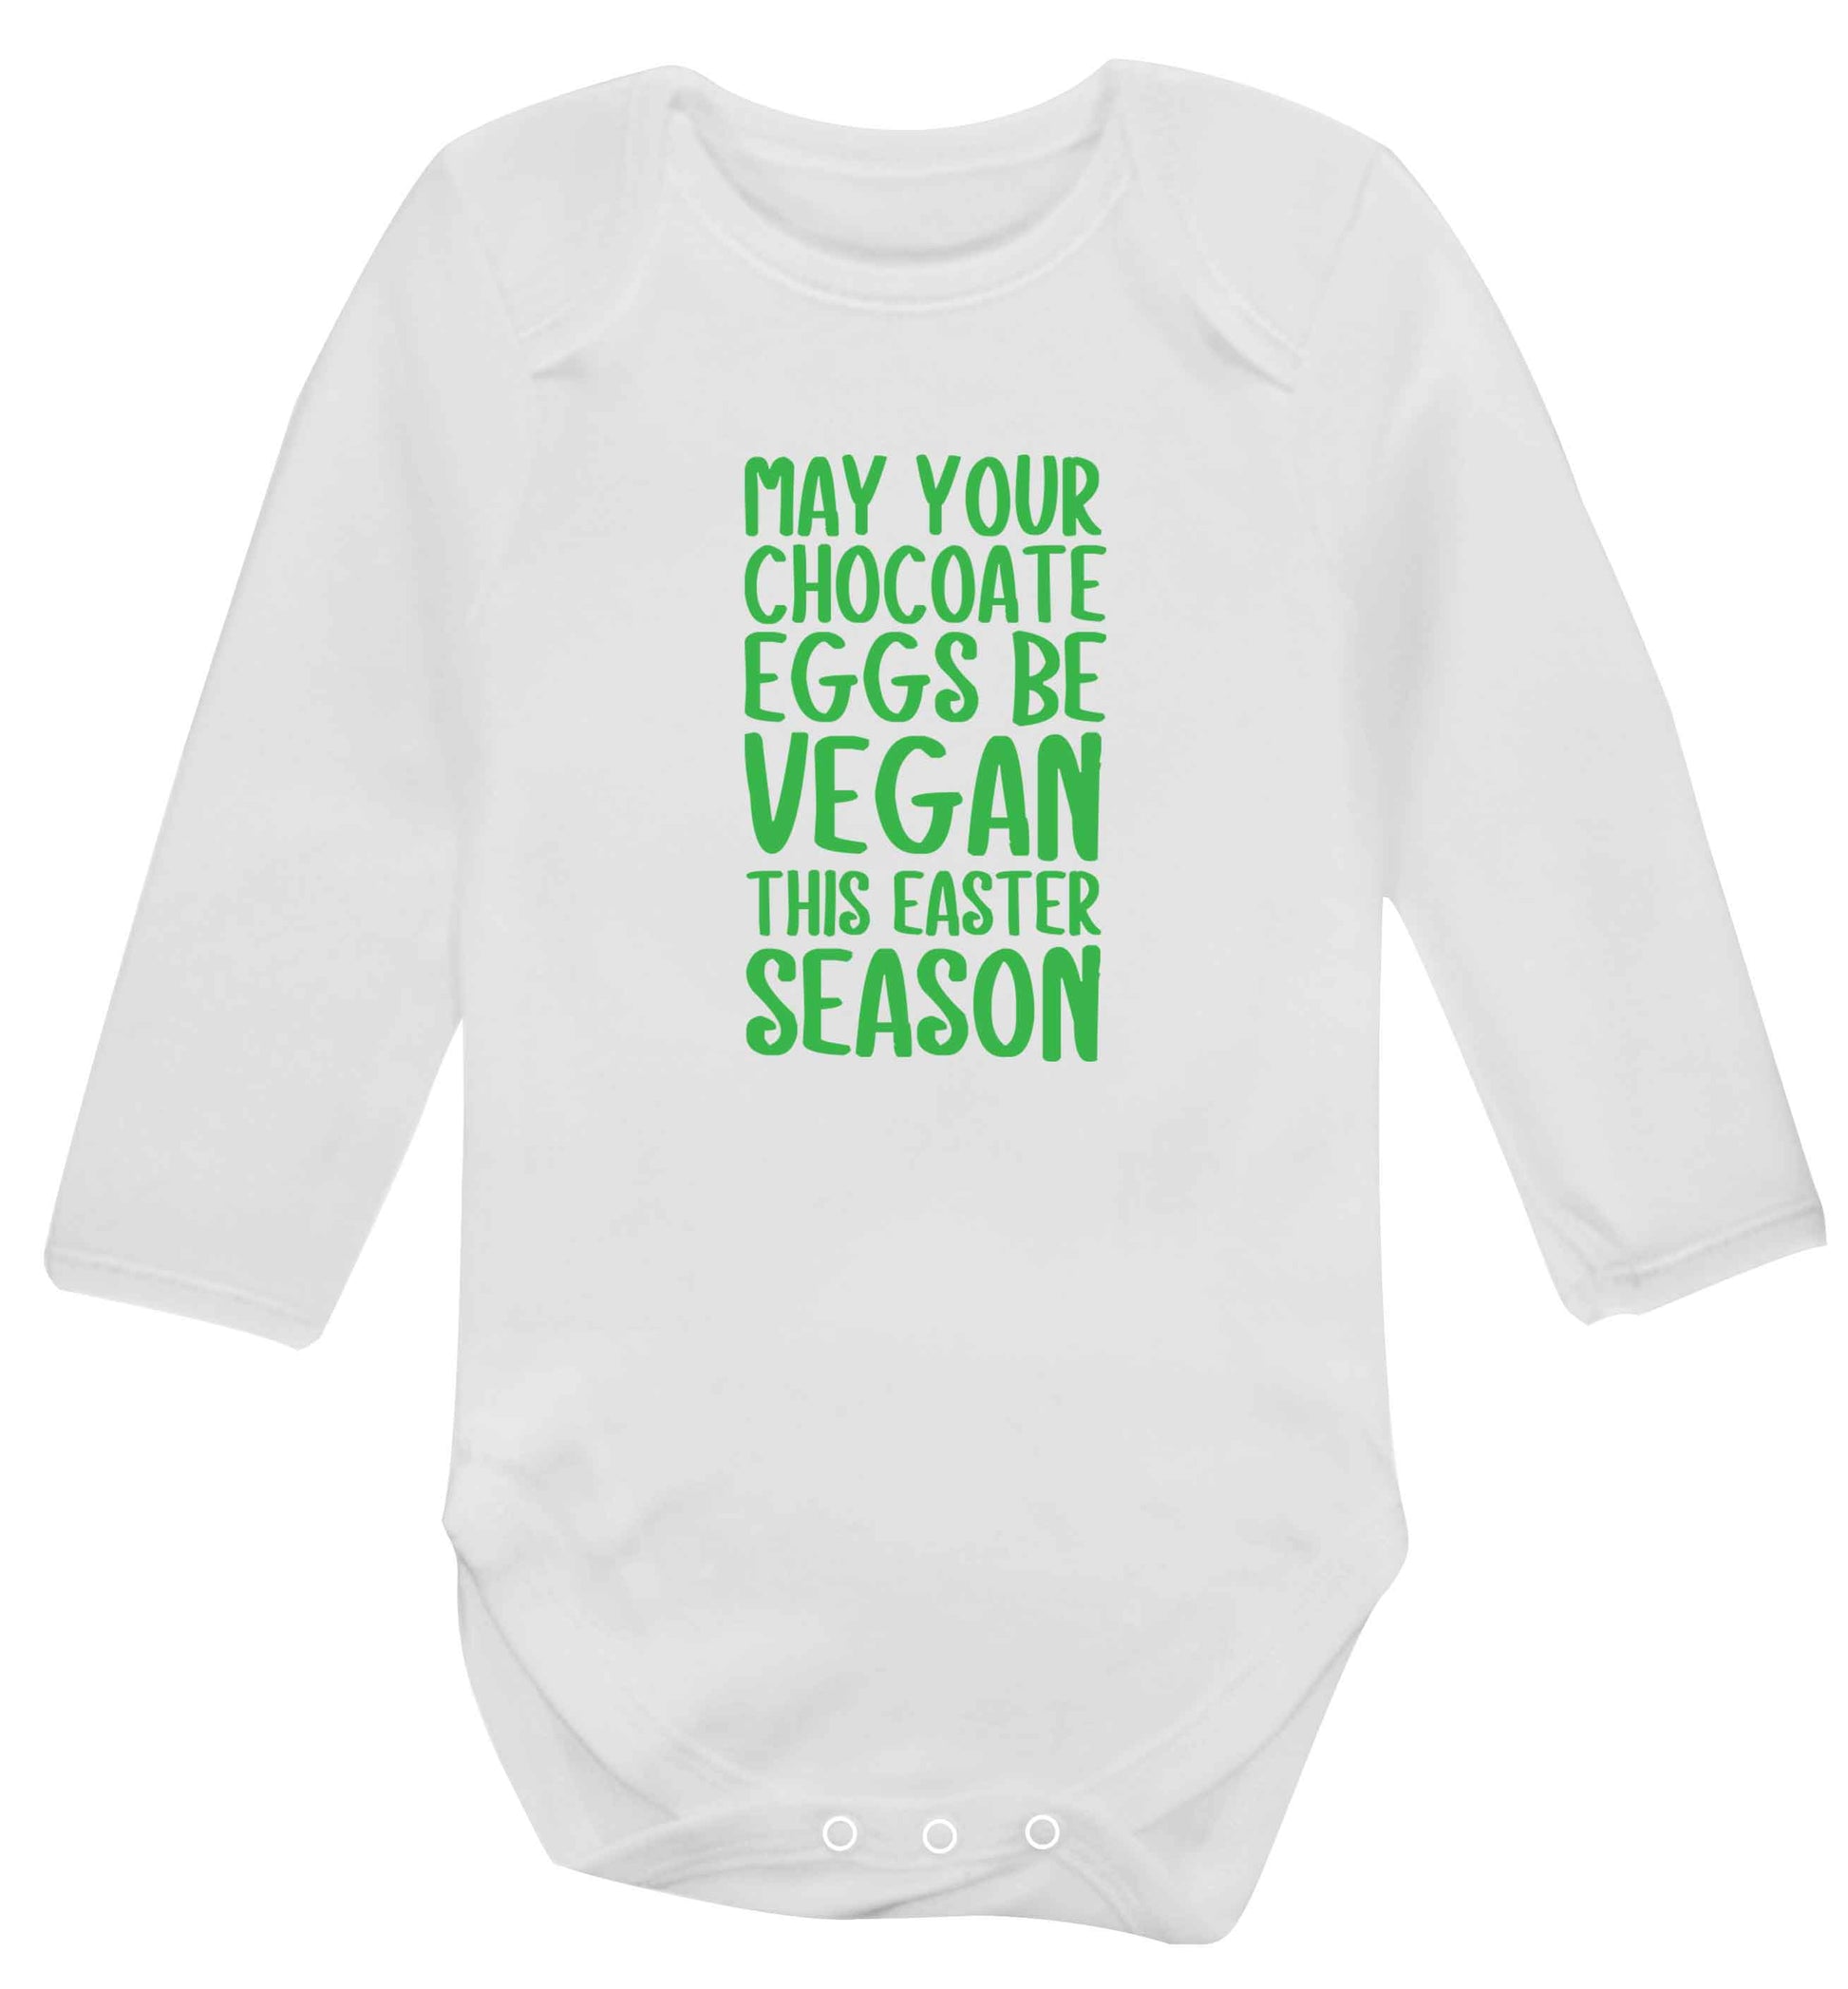 Easter bunny approved! Vegans will love this easter themed baby vest long sleeved white 6-12 months